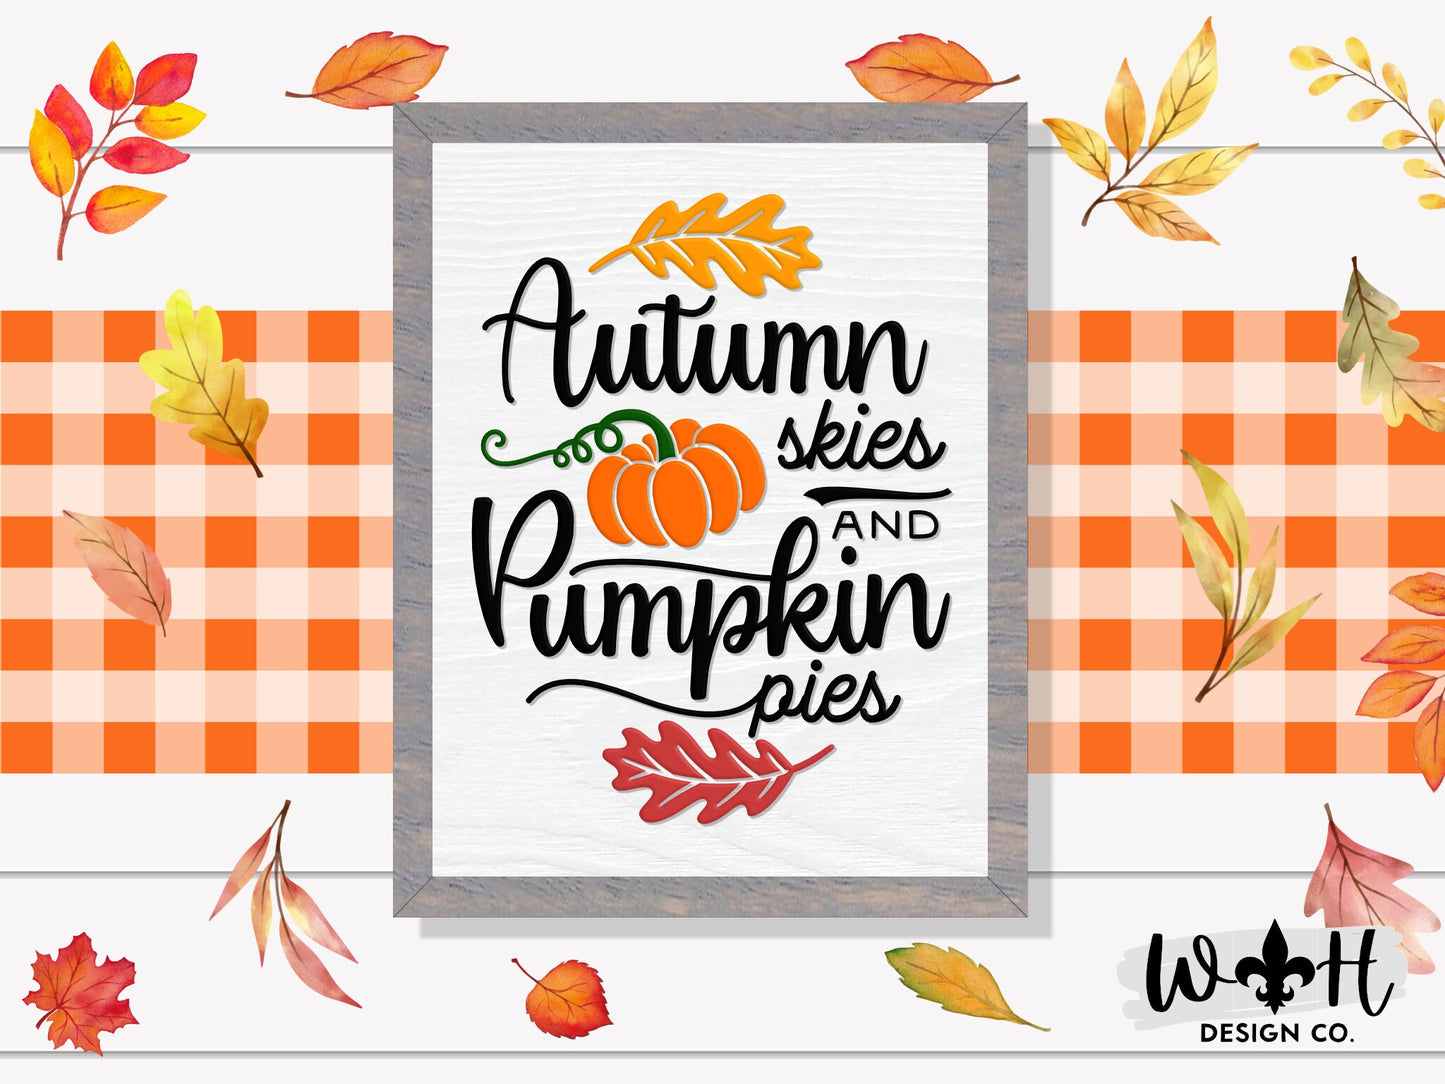 Autumn Skies and Pumpkin Pies - Wooden Coffee Bar Sign - Autumn Cottagecore Home and Kitchen Decor - Console Table Decor - Seasonal Wall Art